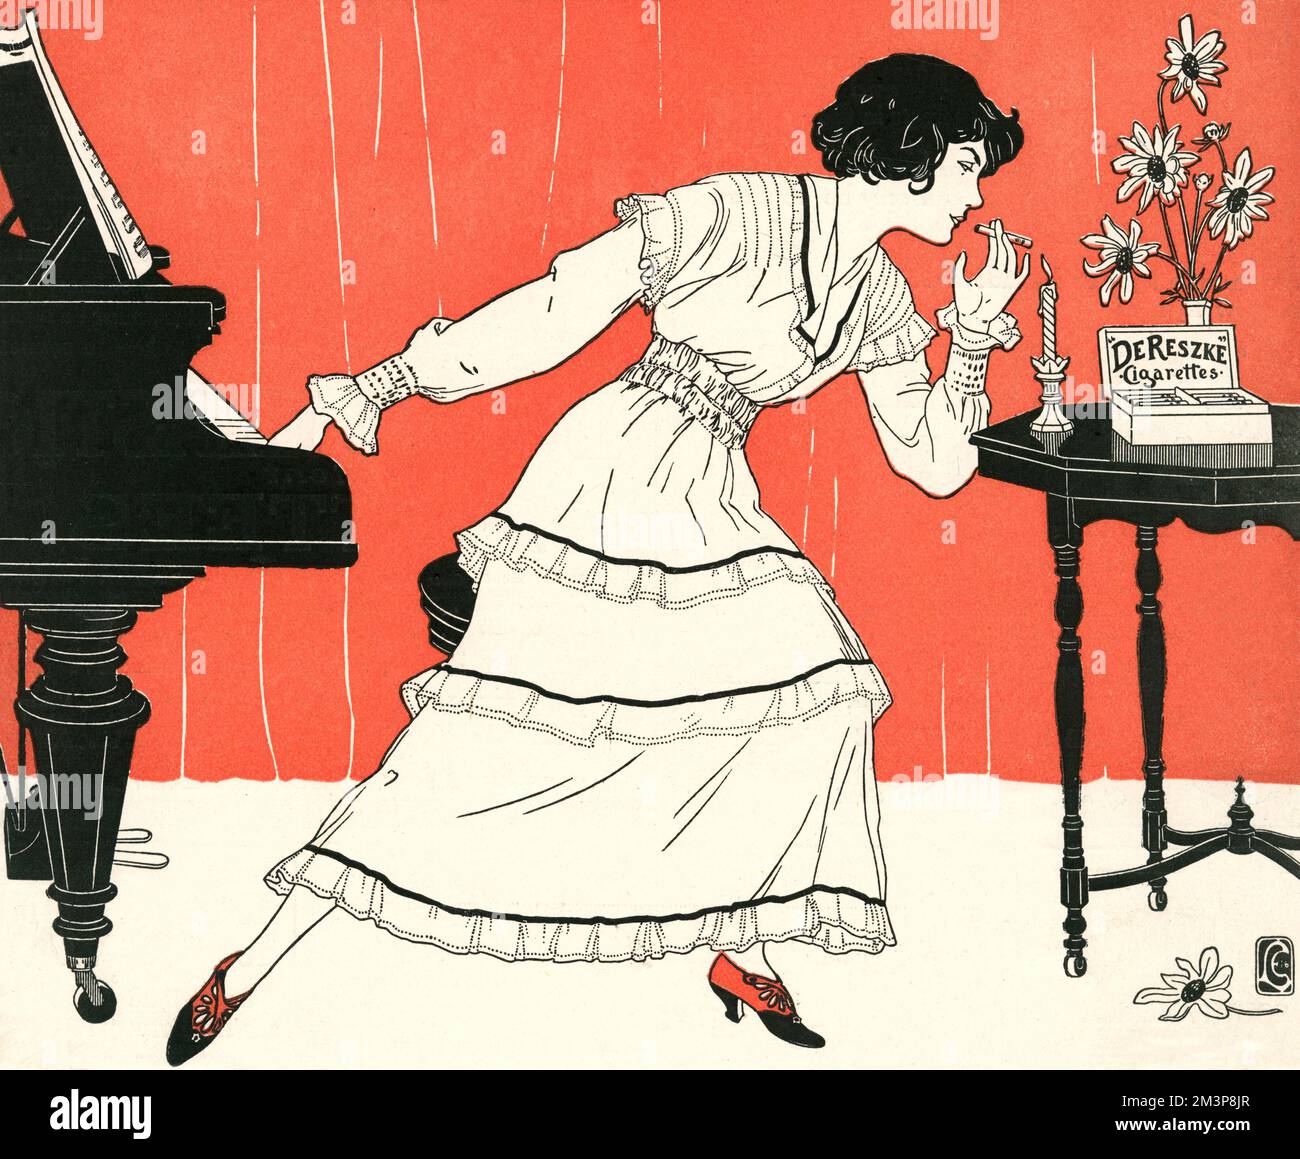 Illustration by E. Lucchesi taken from a De Reske cigarettes advertisement showing a woman multi tasking by playing the piano with one hand and lighting her cigarette from a candle with the other.       Date: 1917 Stock Photo